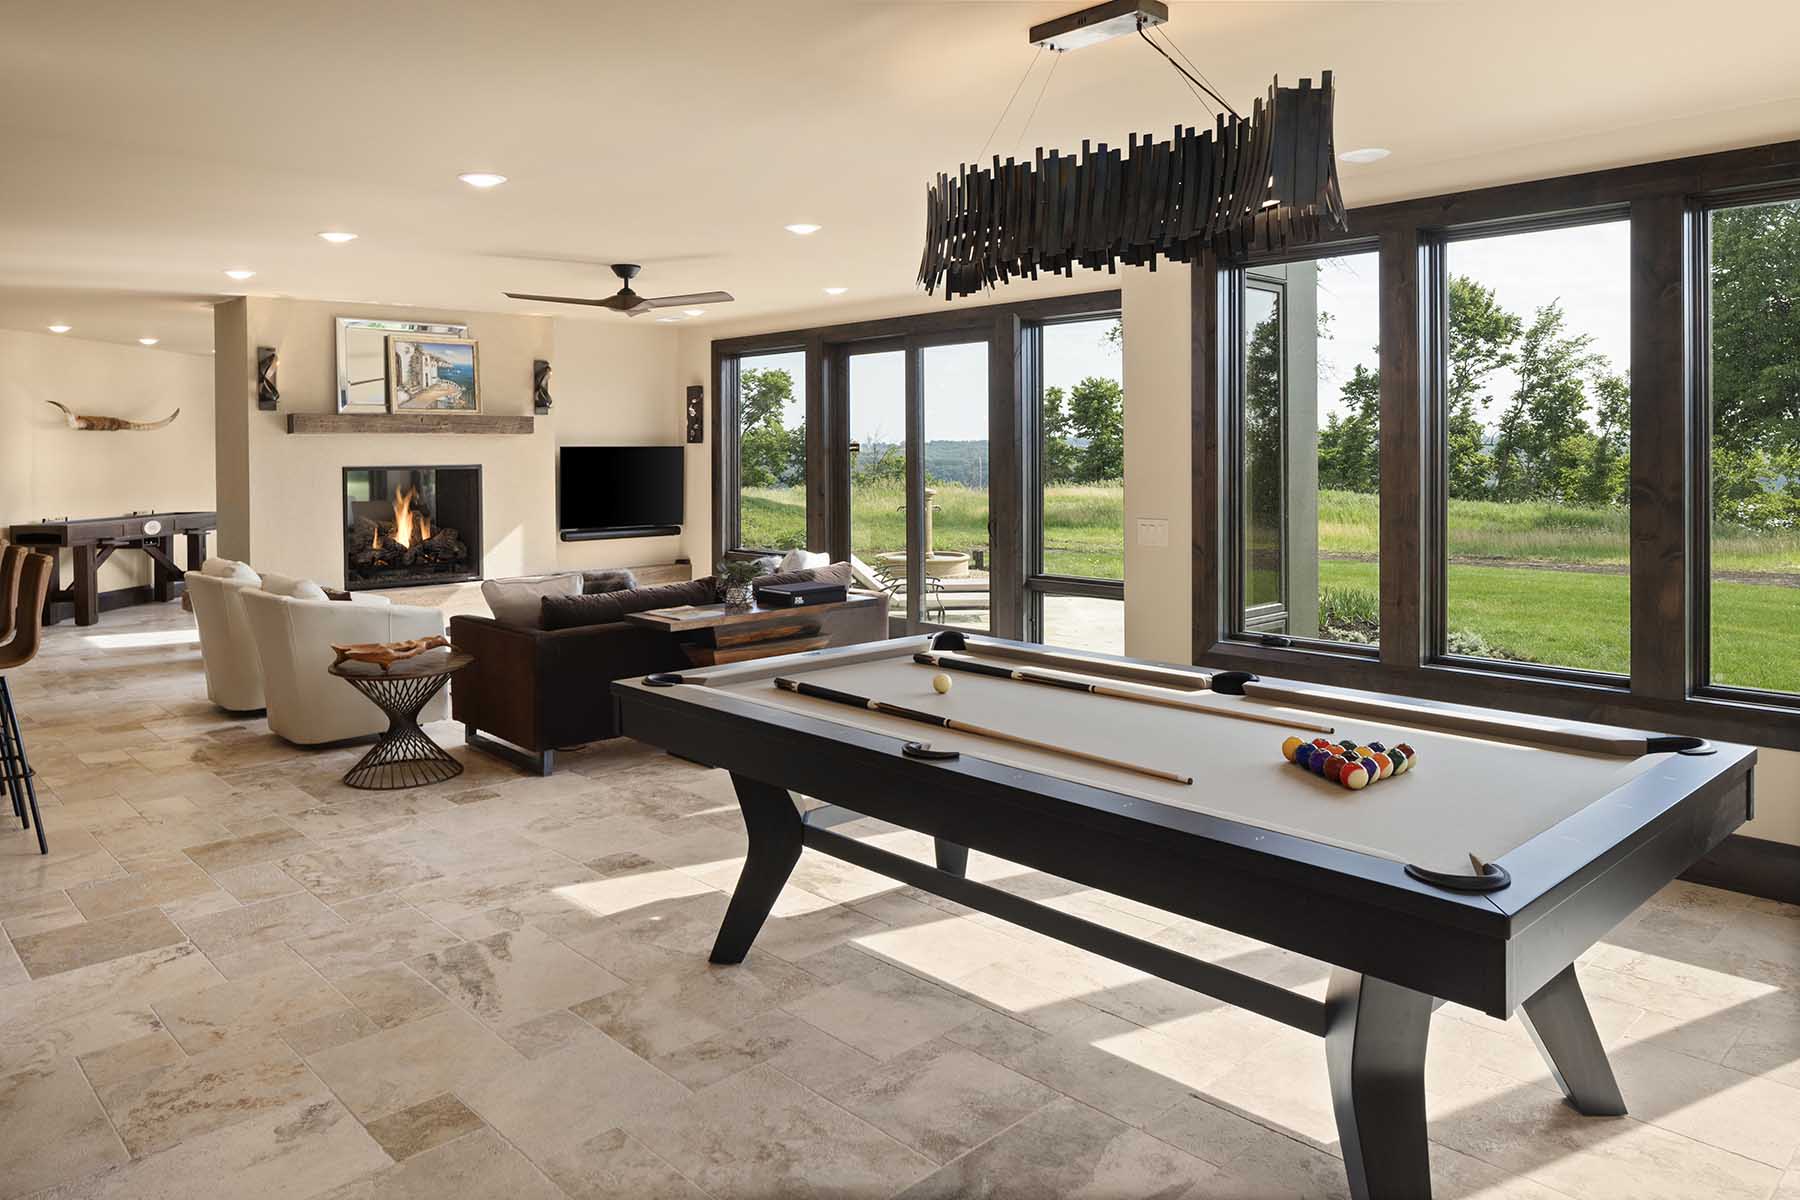 A modern living room with a pool table and a fireplace in a Tuscan Mediterranean home.